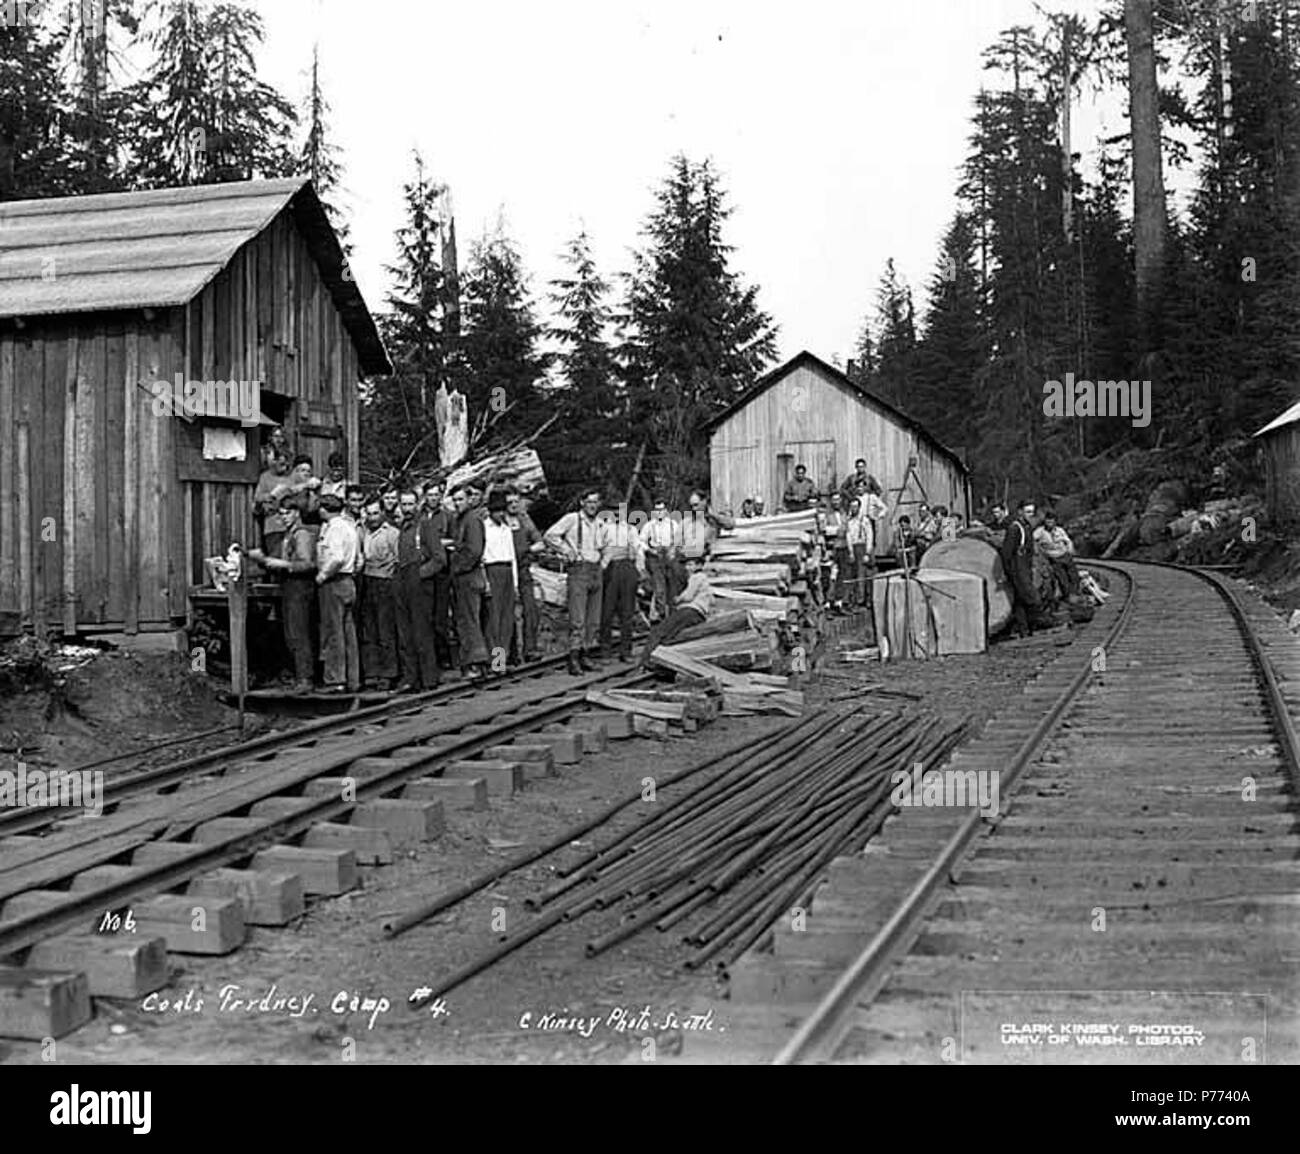 . English: Loggers at camp 4, Coats-Fordney Lumber Company, near Aberdeen, ca. 1920 . English: Caption on image: Coats Fordney, Camp #4. C. Kinsey Photo, Seattle. No. 6 PH Coll 516.622 The Coats-Fordney Lumber Company started out as the A.F. Coats Lumber Company in 1905, headquartered in Aberdeen. It became the Coats-Fordney Lumber Company in 1910, and by 1924, it was called the Donovan-Corkery Lumber Company. Aberdeen is a city in Grays Harbor (formerly called Chehalis) County. The town was platted by Samuel Benn in 1884 on his homestead. Benn was born in New York City and in 1856 he came to  Stock Photo